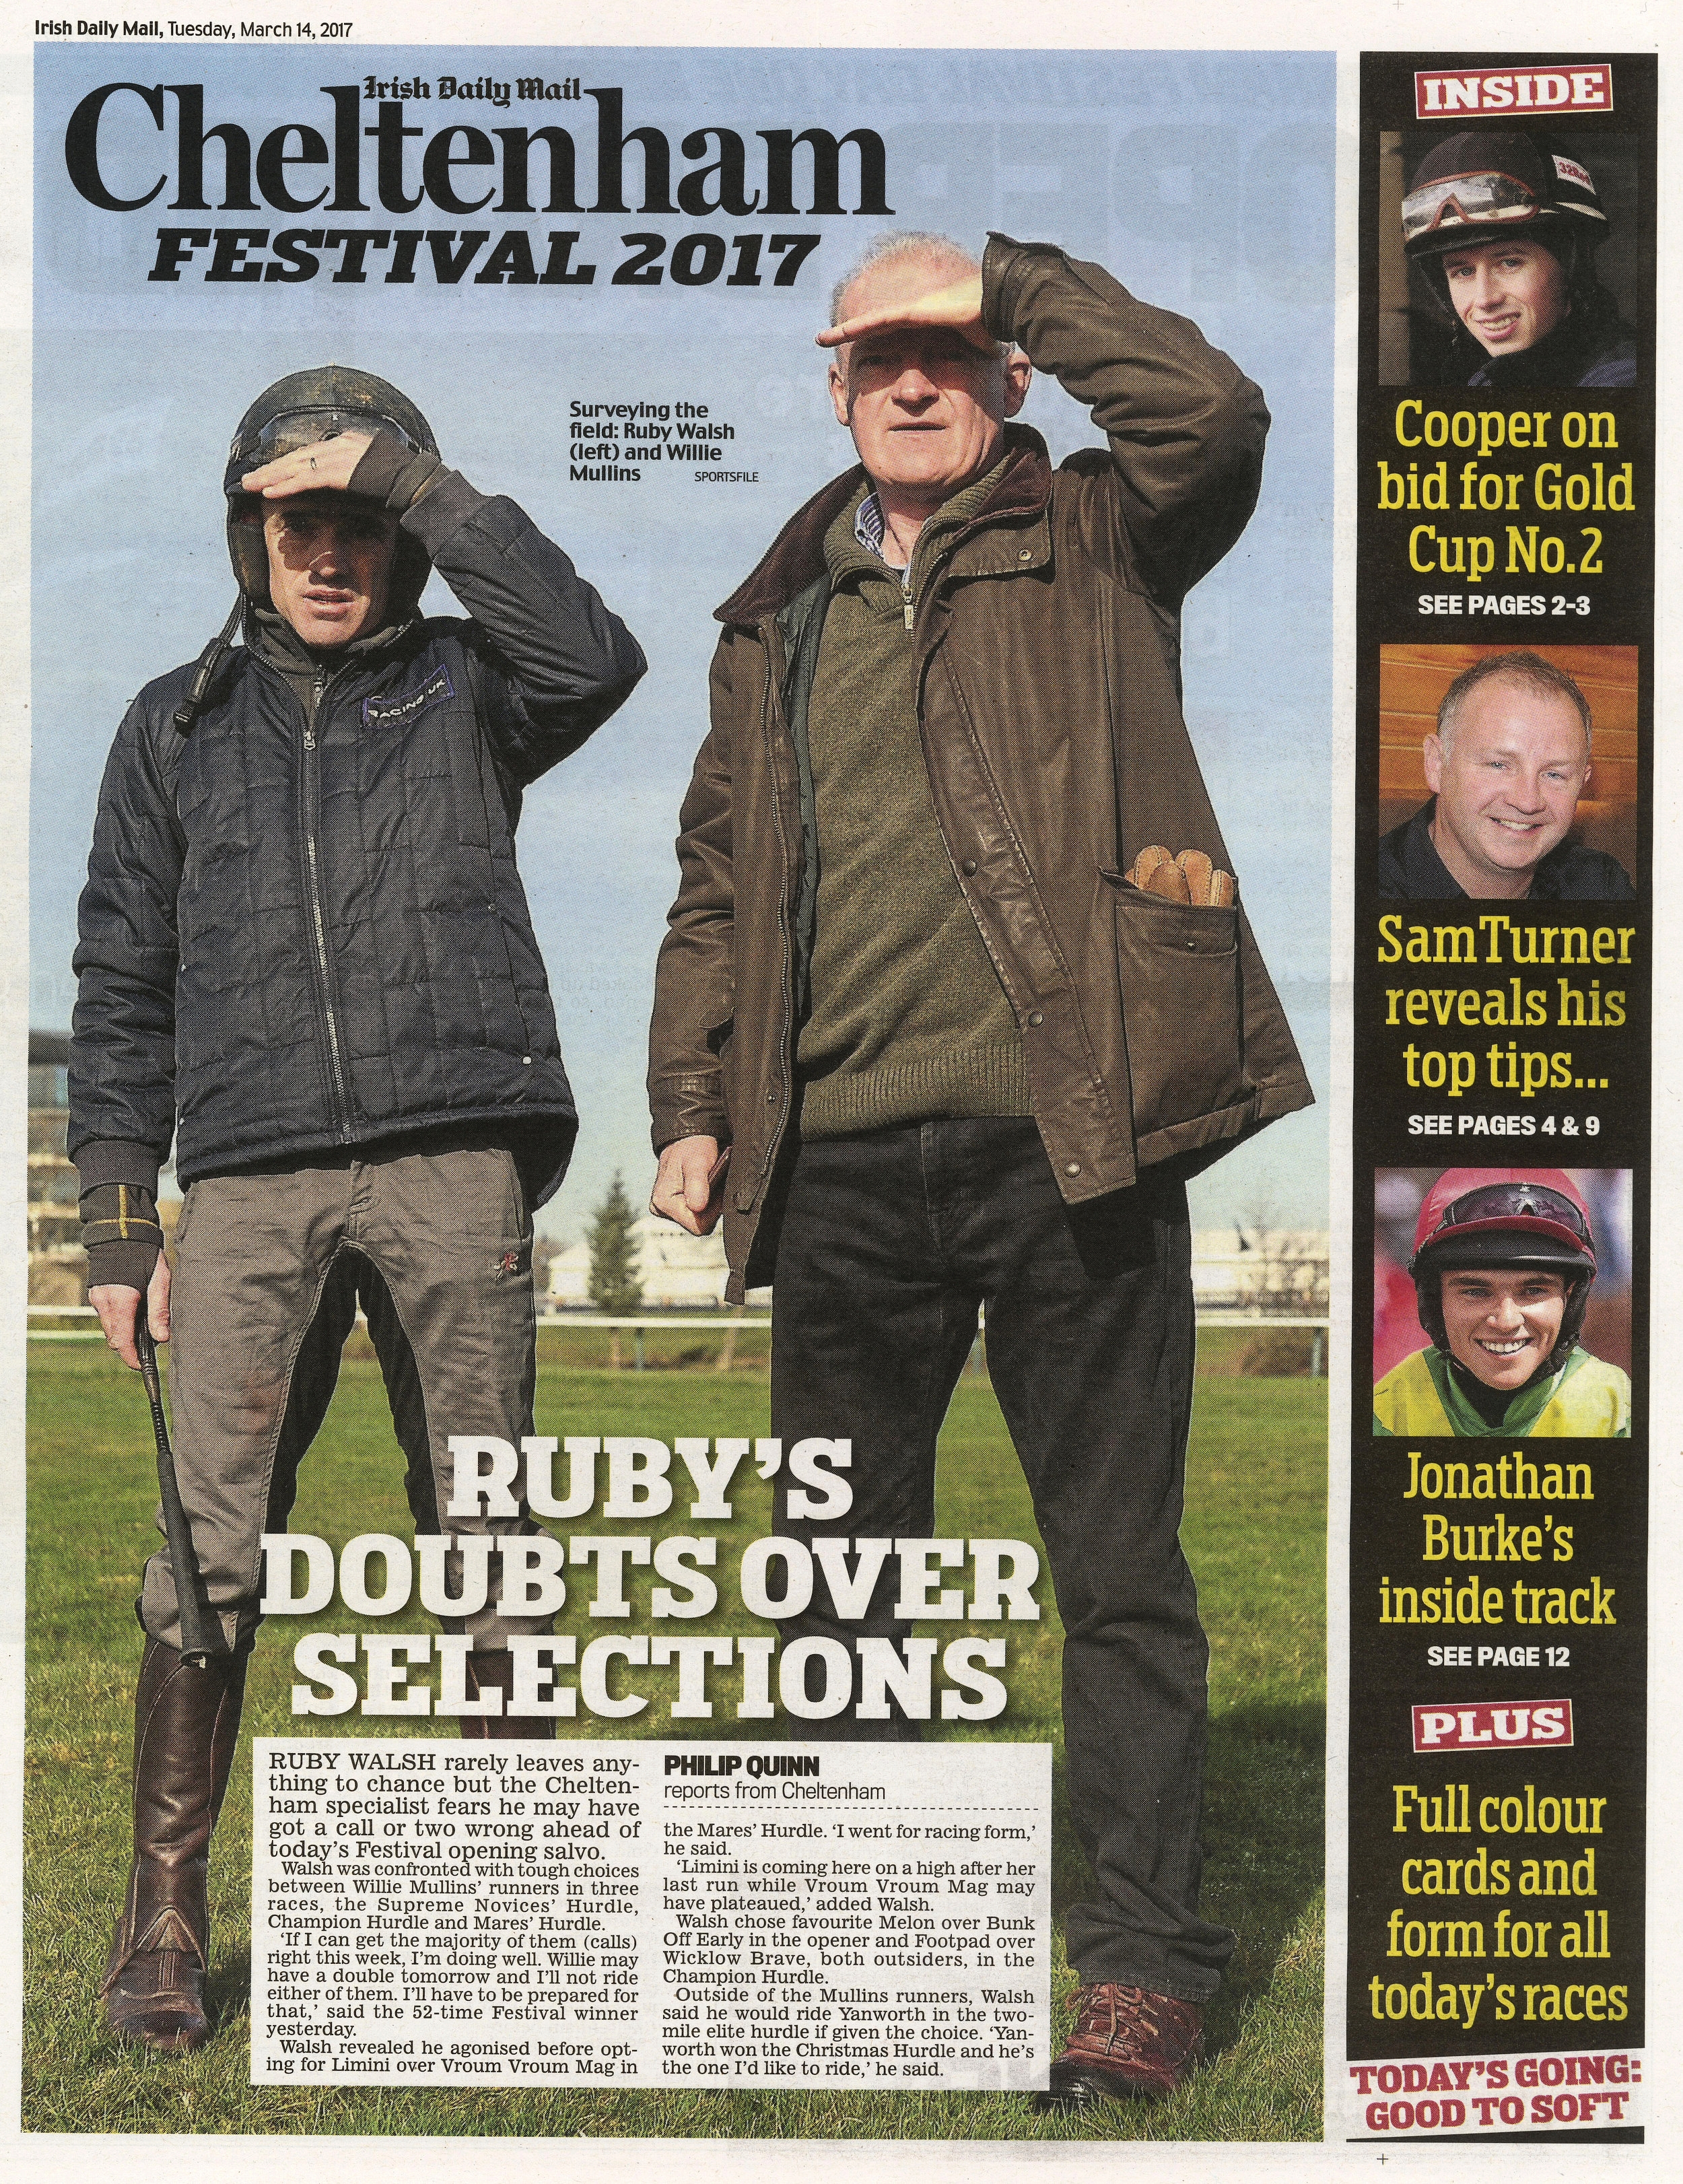  Ruby Walsh and Willie Mullins survey the racecourse ahead of the Cheltenham Festival March 14 2017  Irish Daily Mail  